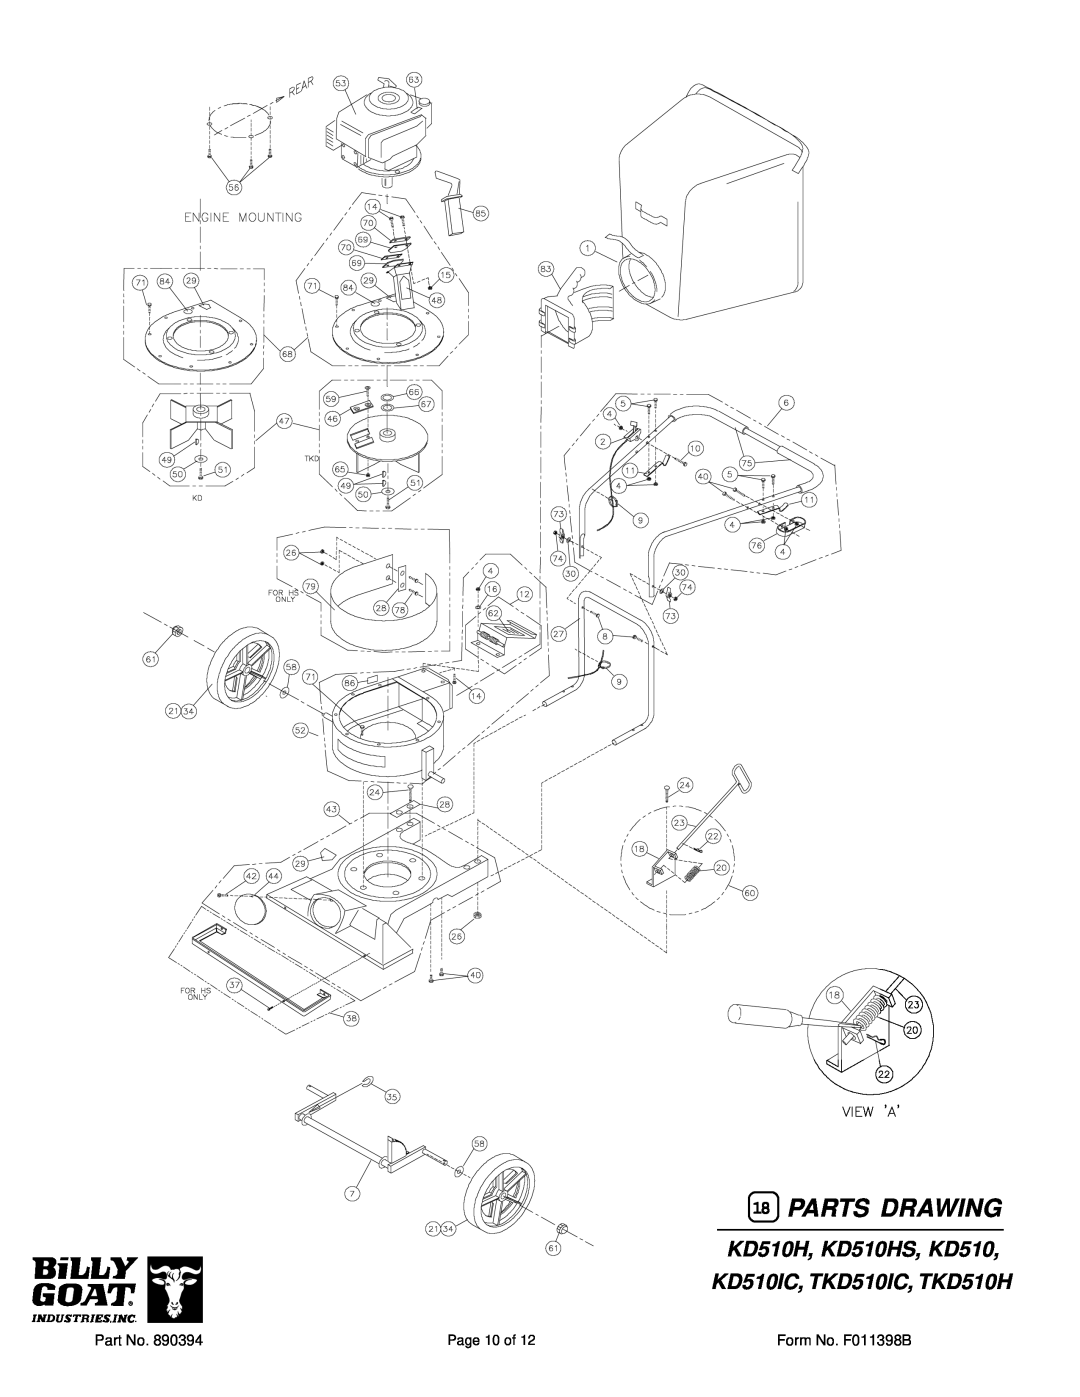 Billy Goat specifications Parts Drawing, KD510H, KD510HS, KD510 KD510IC, TKD510IC, TKD510H 